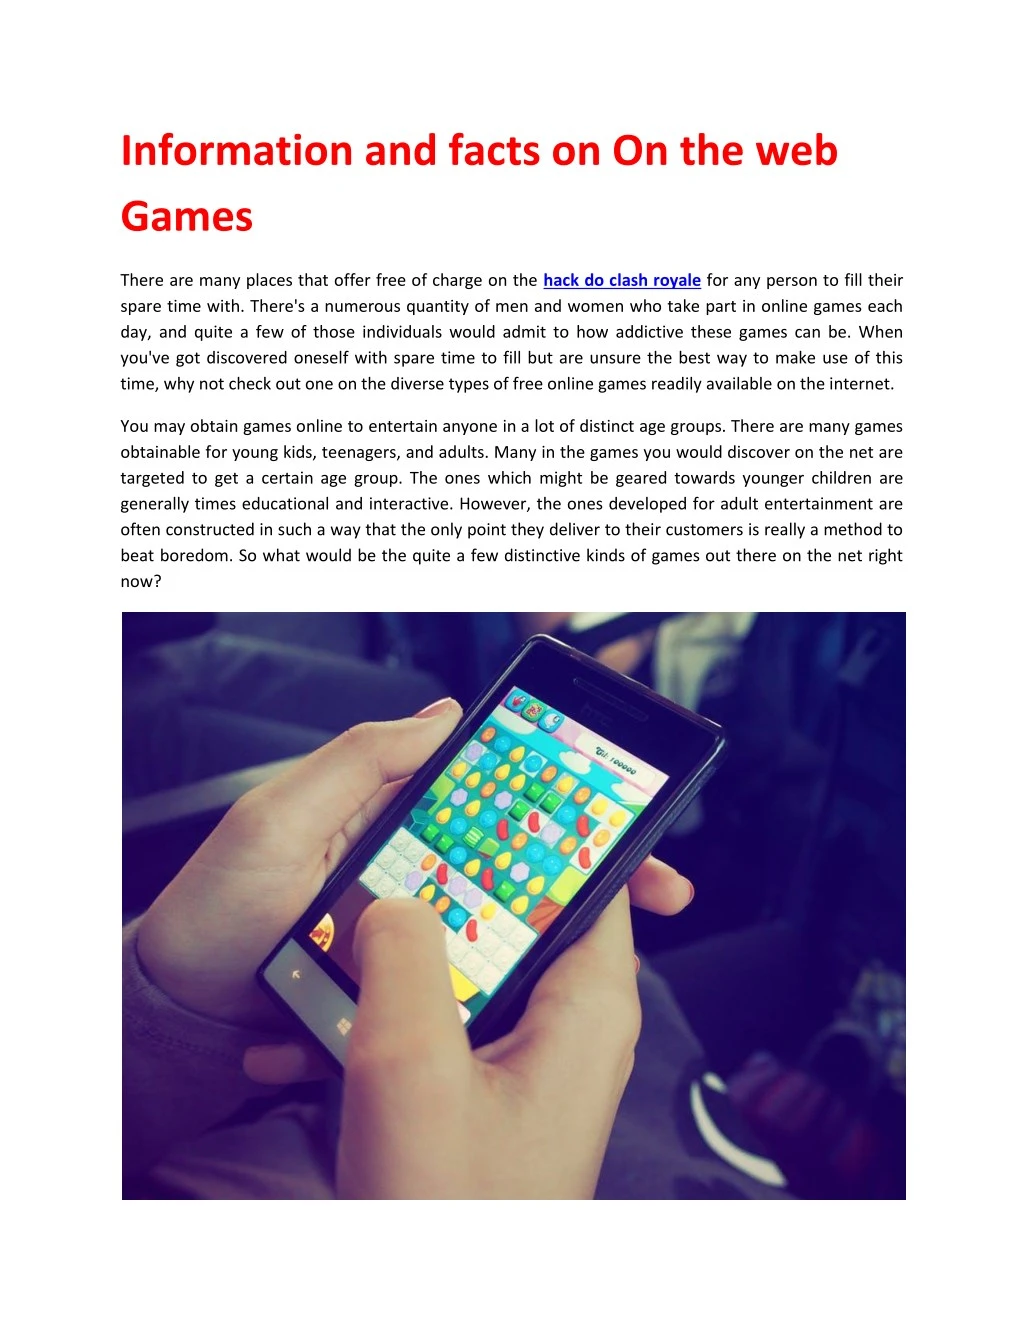 information and facts on on the web games